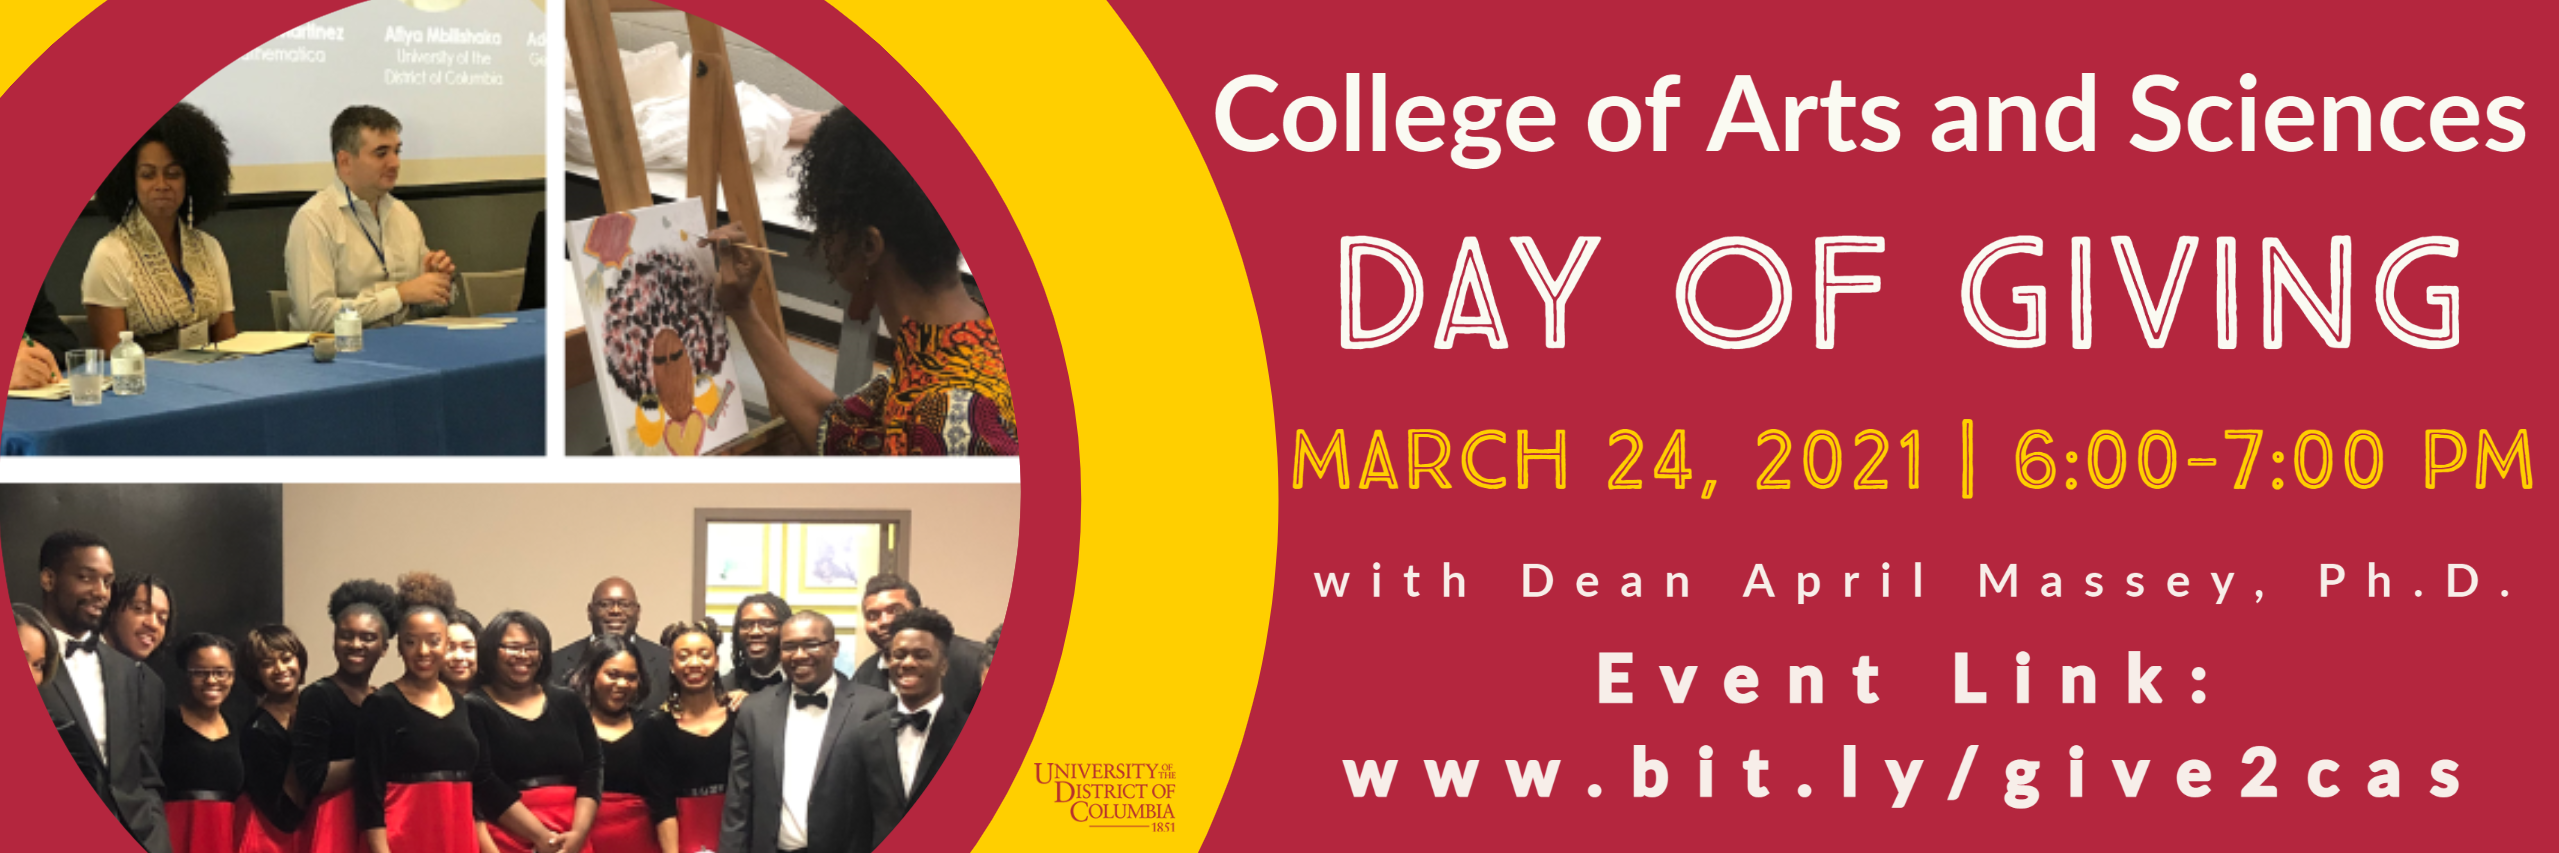 CAS DAY OF GIVING – College of Arts & Sciences – March 24, 2021